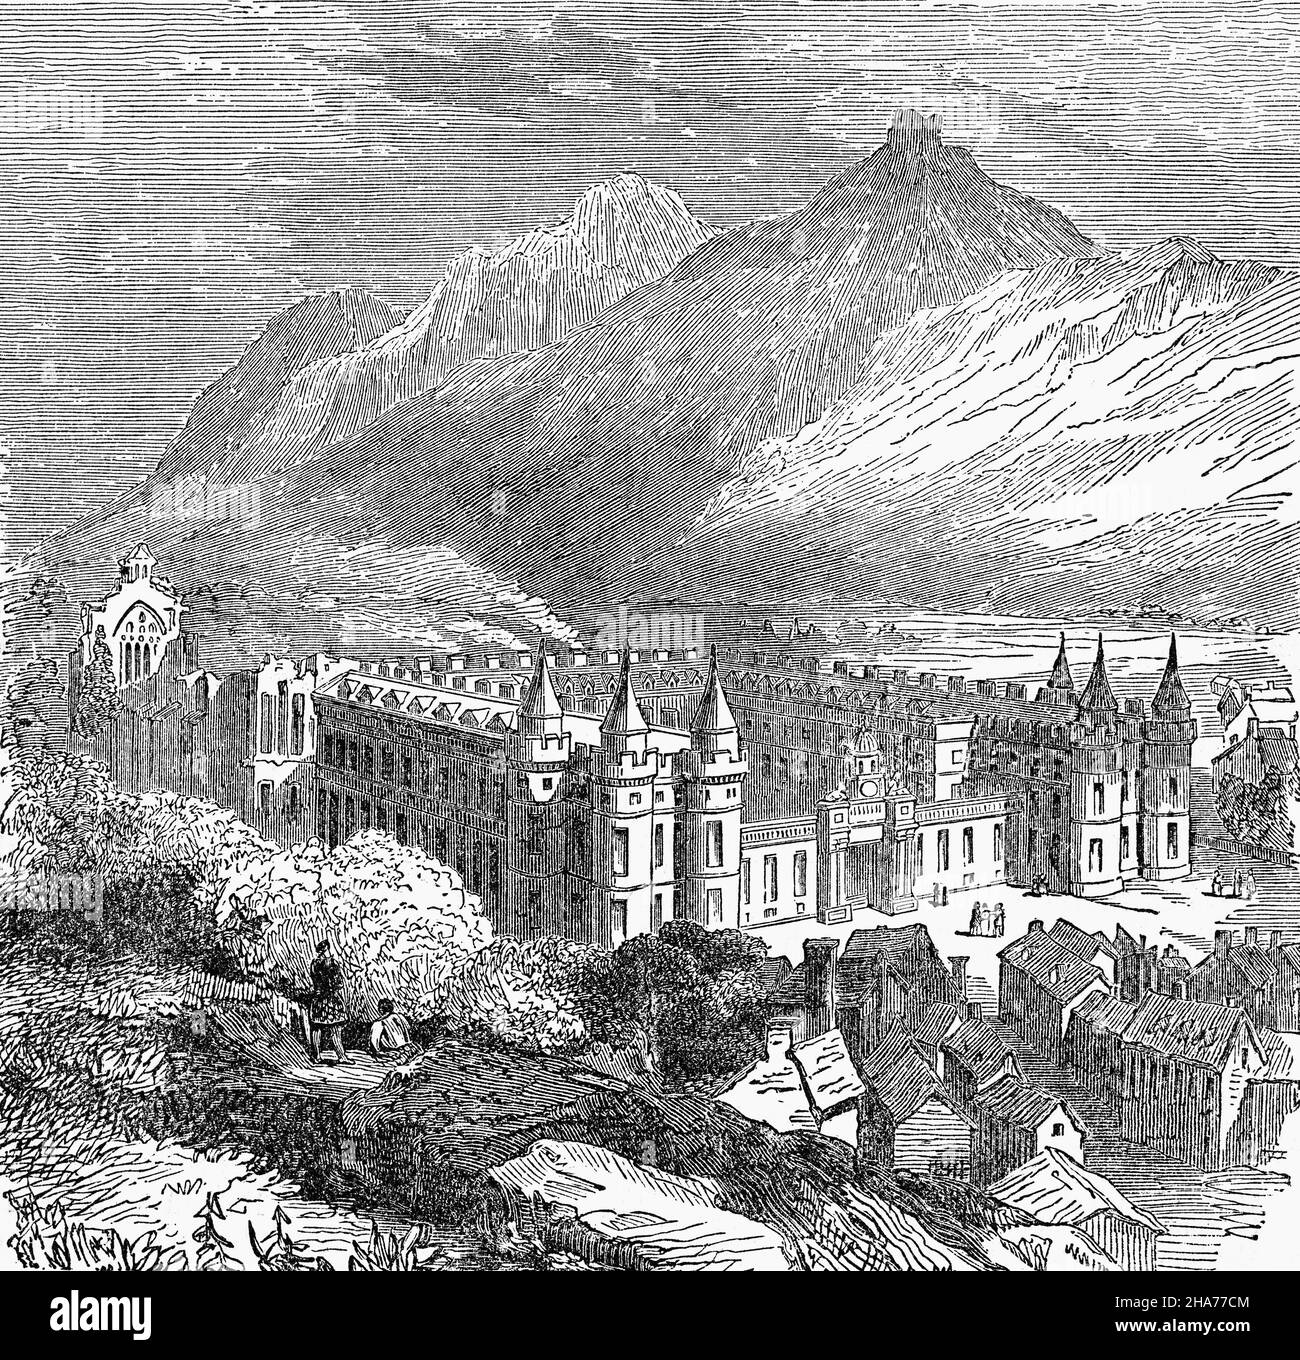 A late 19th Century illustration of the Palace of Holyroodhouse, aka Holyrood Palace, the official residence of the British monarch in Scotland. Located at the bottom of the Royal Mile in Edinburgh, at the opposite end to Edinburgh Castle, Holyrood House, designed by Sir William Bruce and built between 1671 and 1678, has served as the principal royal residence in Scotland and is a setting for state occasions and official entertaining. Stock Photo